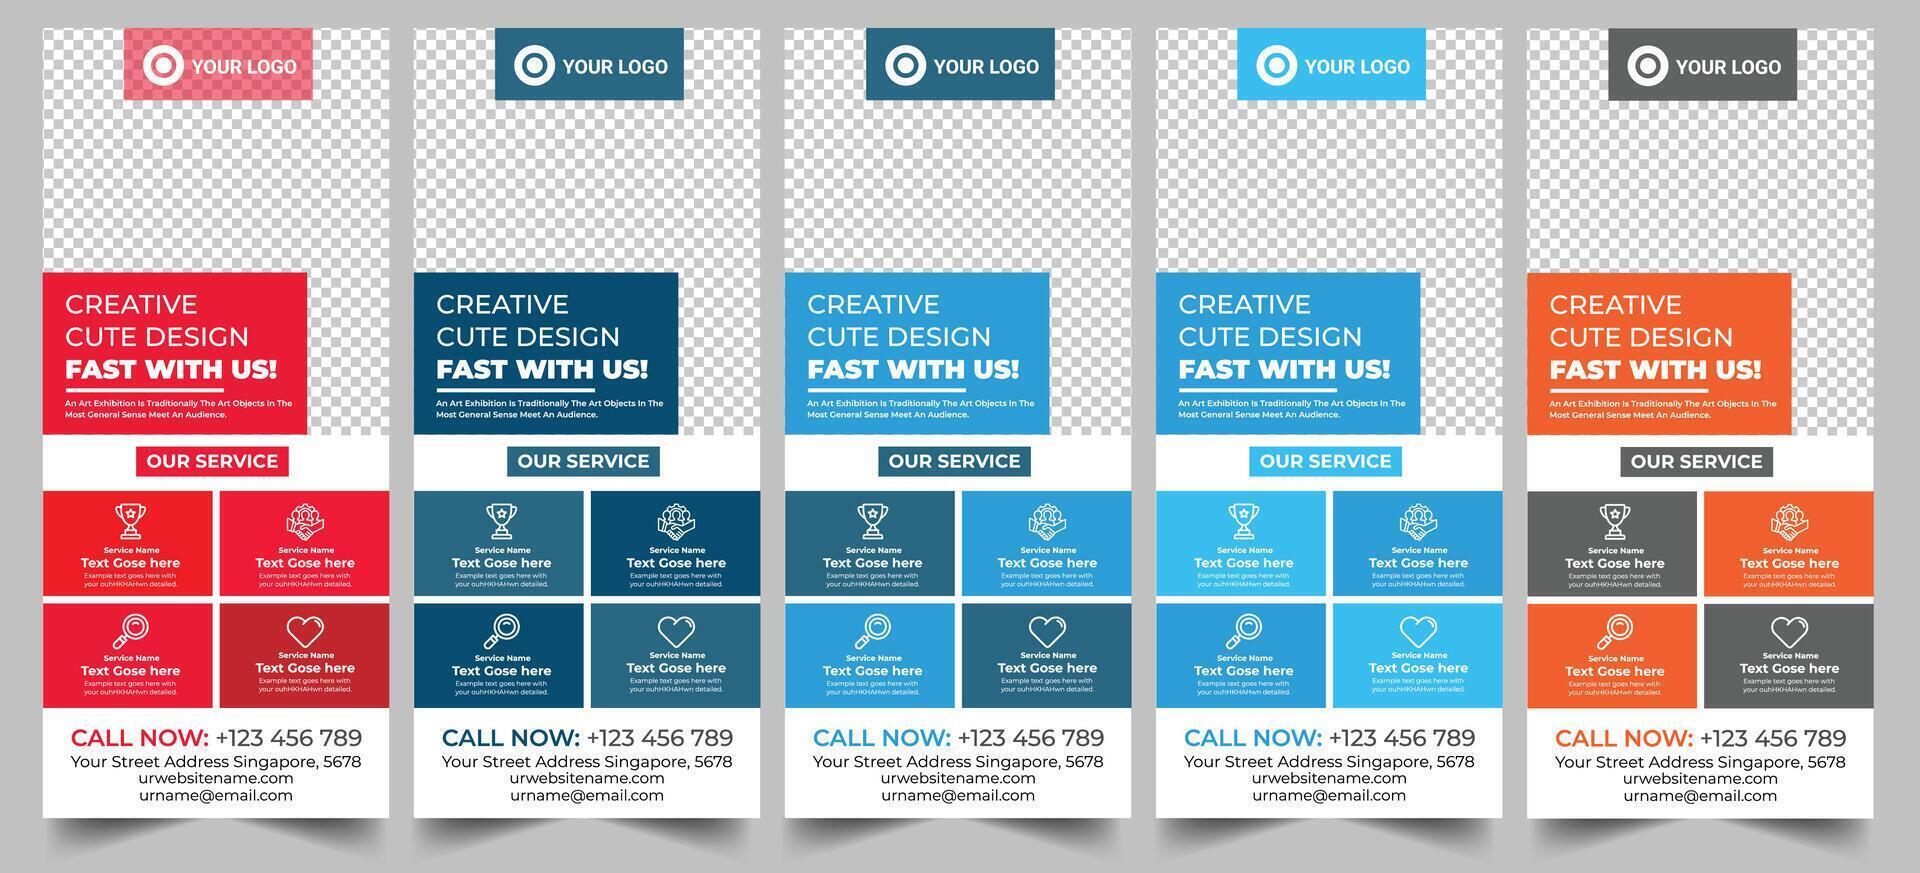 Business Flyer Template with Mockup Fitness Roll Up Banner with Circle Design Free vector